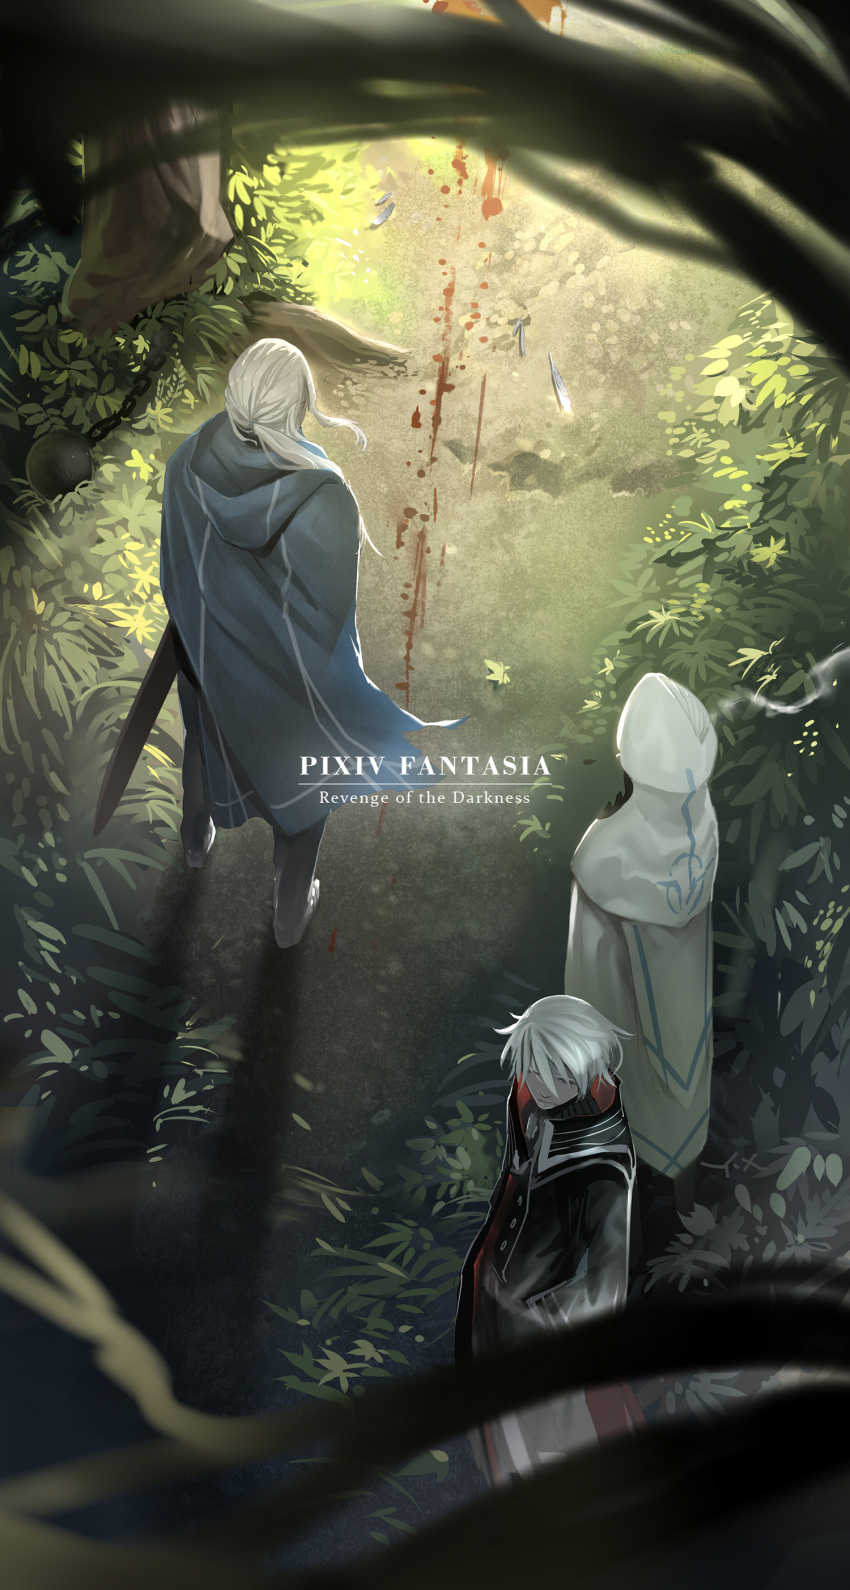 2boys absurdres ball_and_chain blood blood_splatter blurry cloak commentary copyright_name depth_of_field fantasy feathers forest from_above from_behind hands_in_pockets highres hood leaf long_hair multiple_boys nature out_of_frame path pixiv_fantasia pixiv_fantasia_revenge_of_the_darkness ponytail road shadow sheath short_hair silver_hair sword weapon white_hair wind